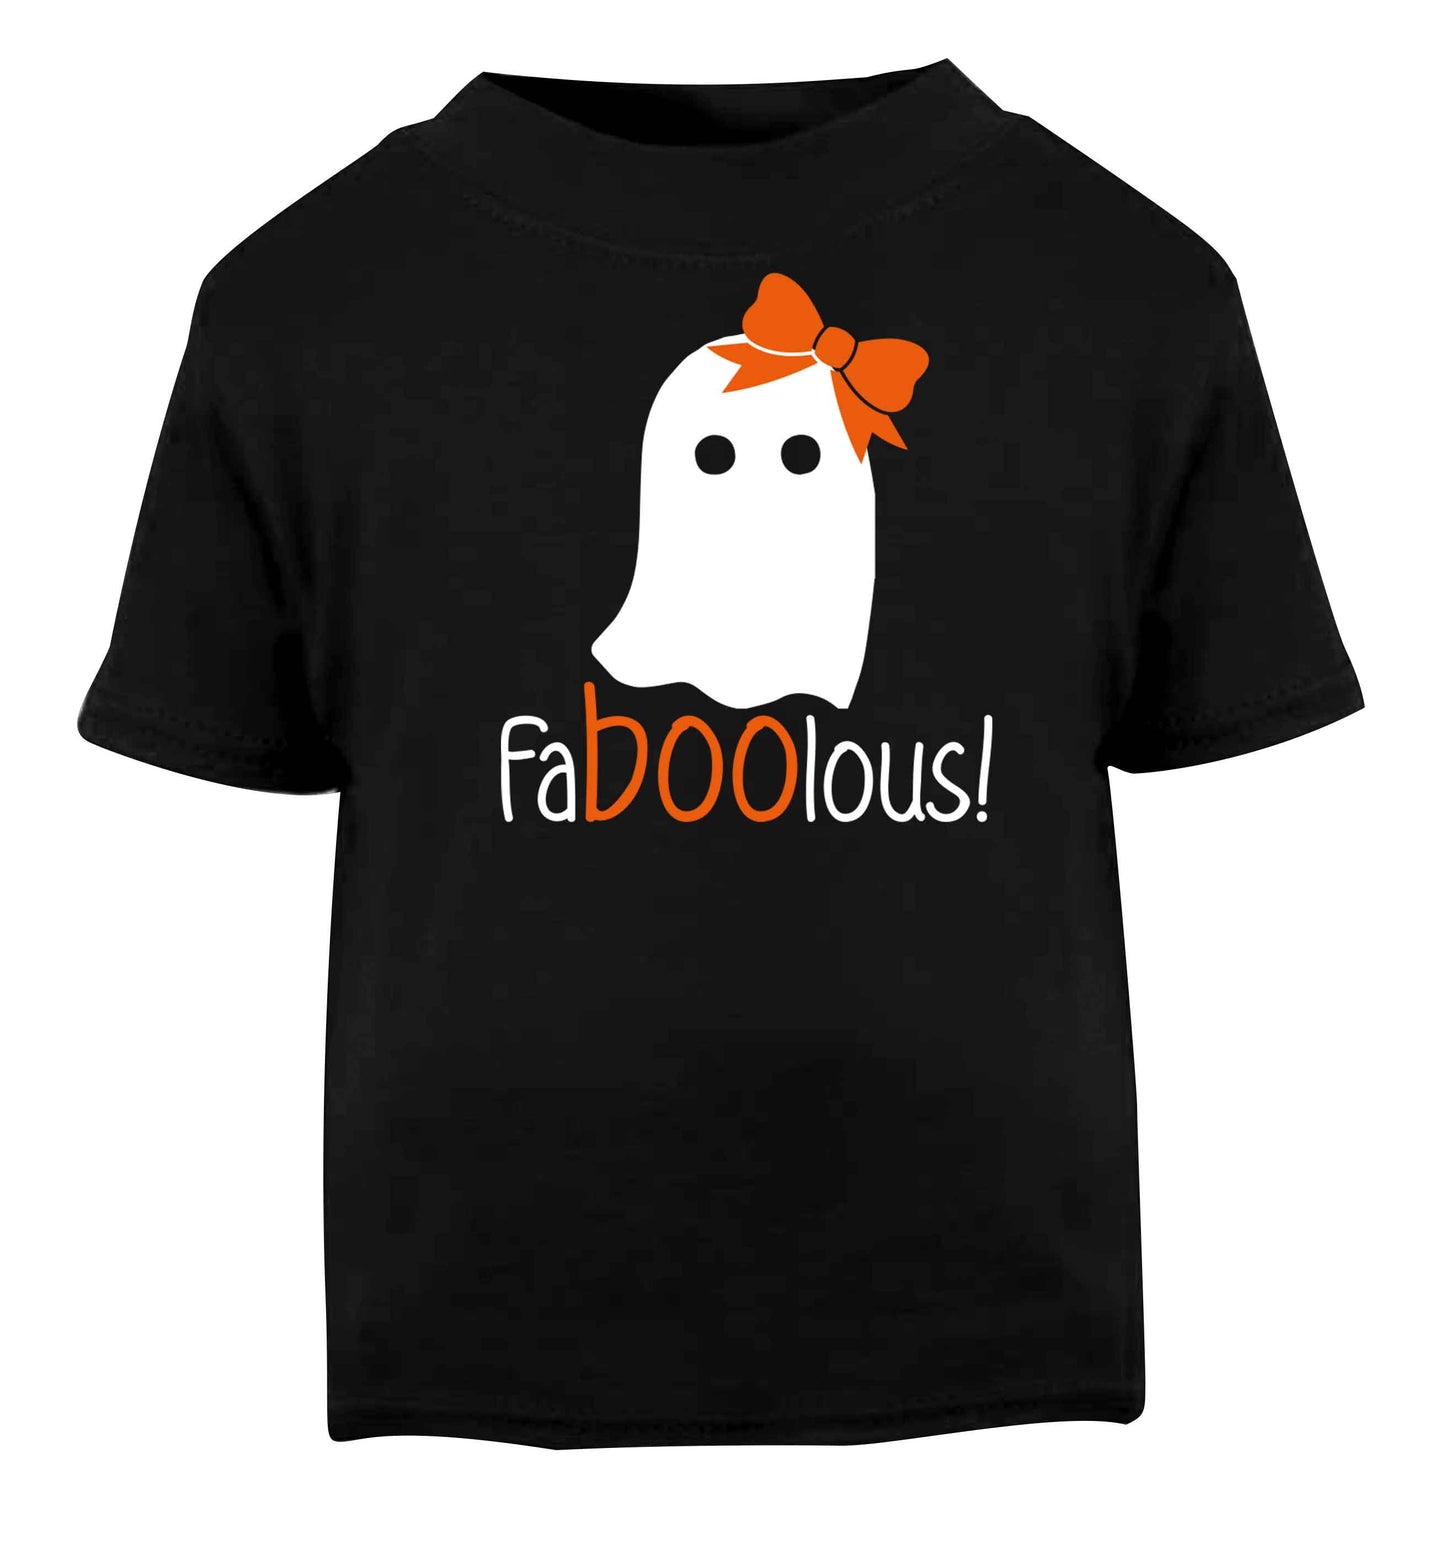 Faboolous ghost Black baby toddler Tshirt 2 years